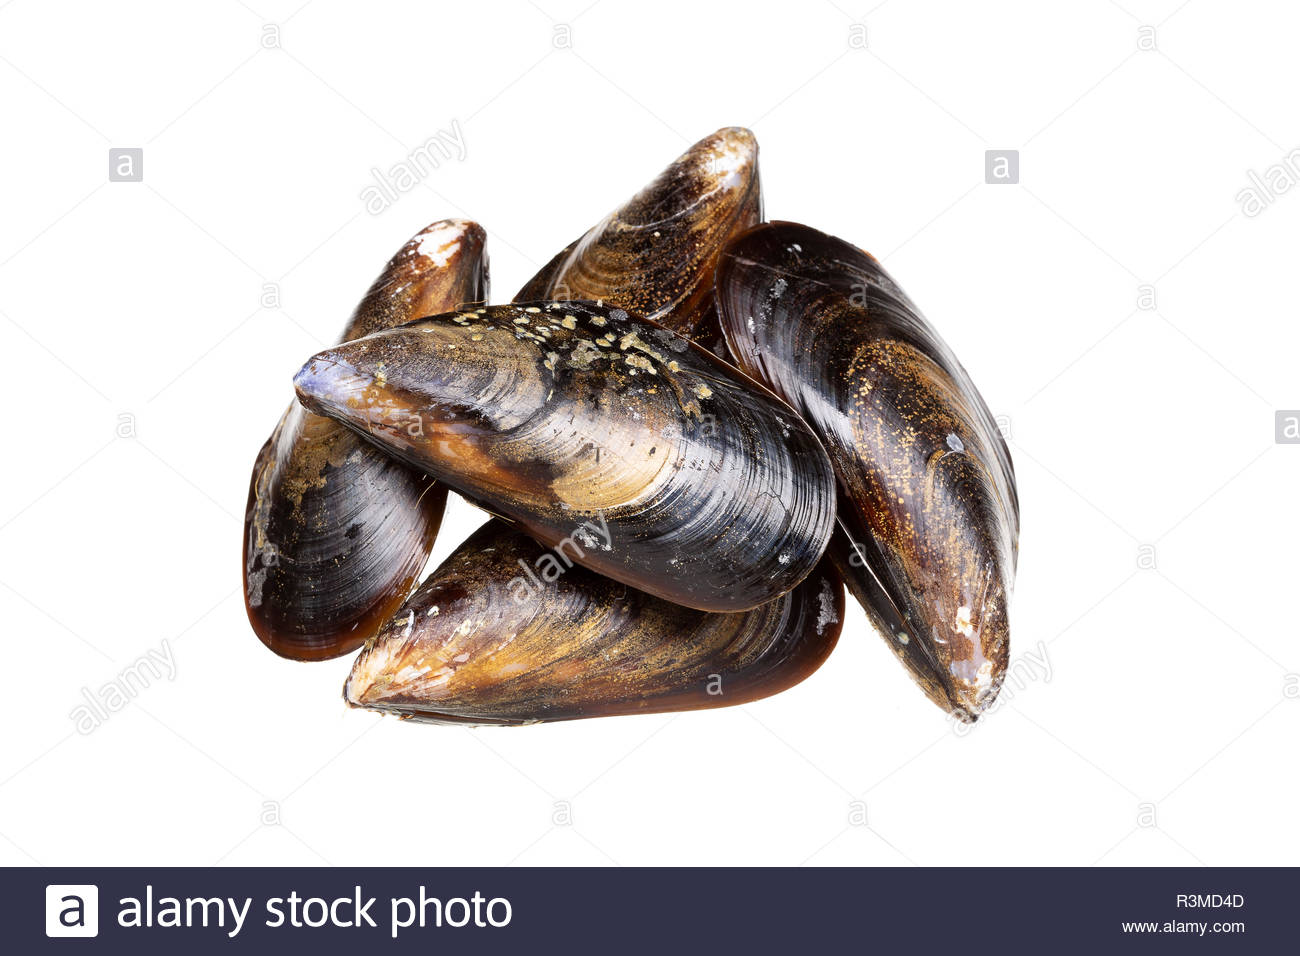 Fresh Mussels Isolated On White Background From Atlantic